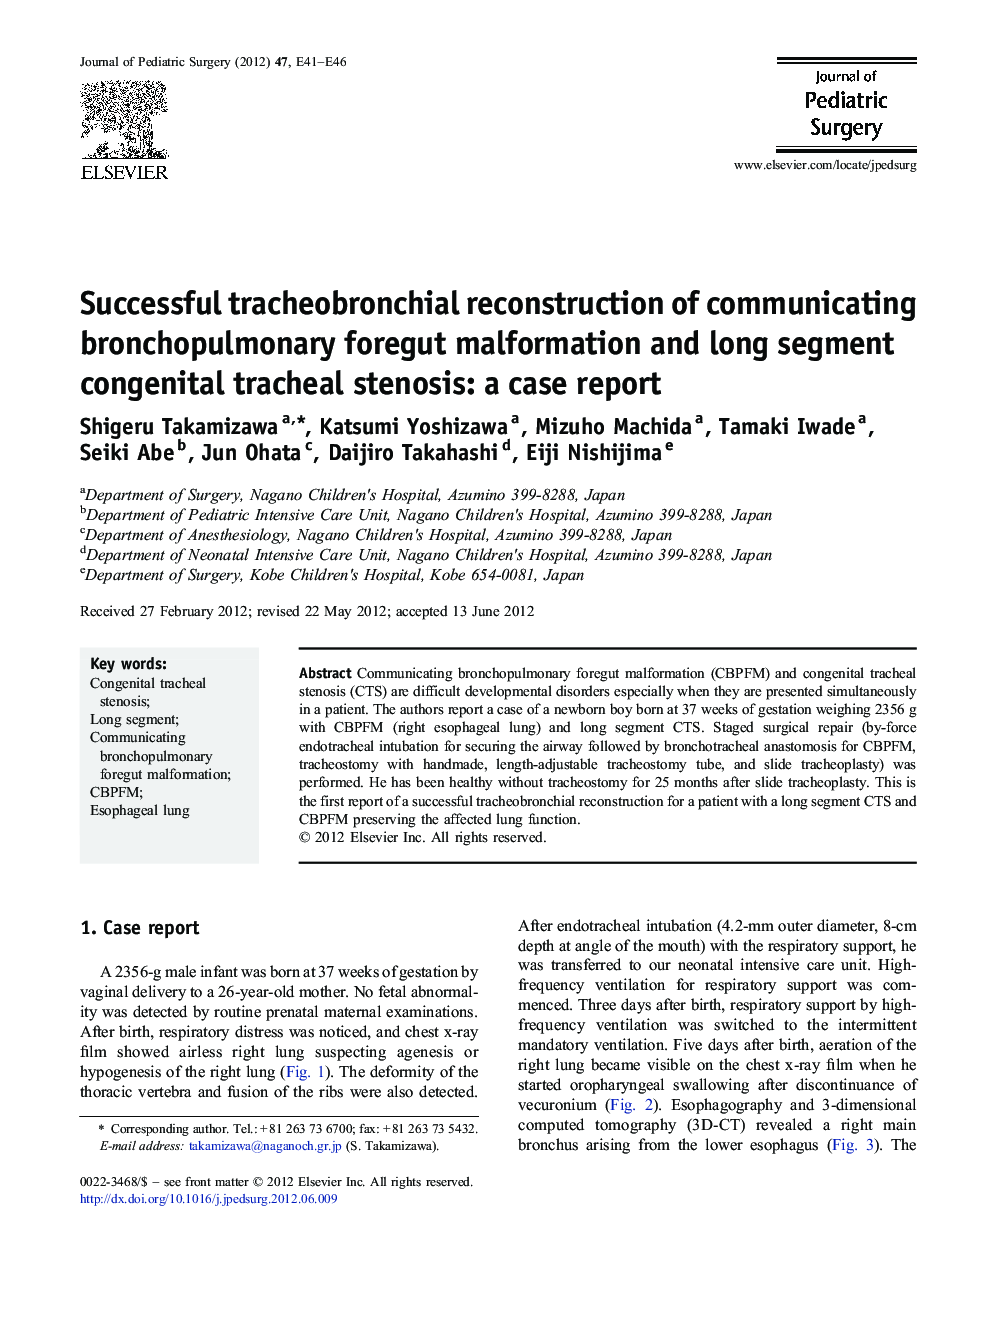 Successful tracheobronchial reconstruction of communicating bronchopulmonary foregut malformation and long segment congenital tracheal stenosis: a case report